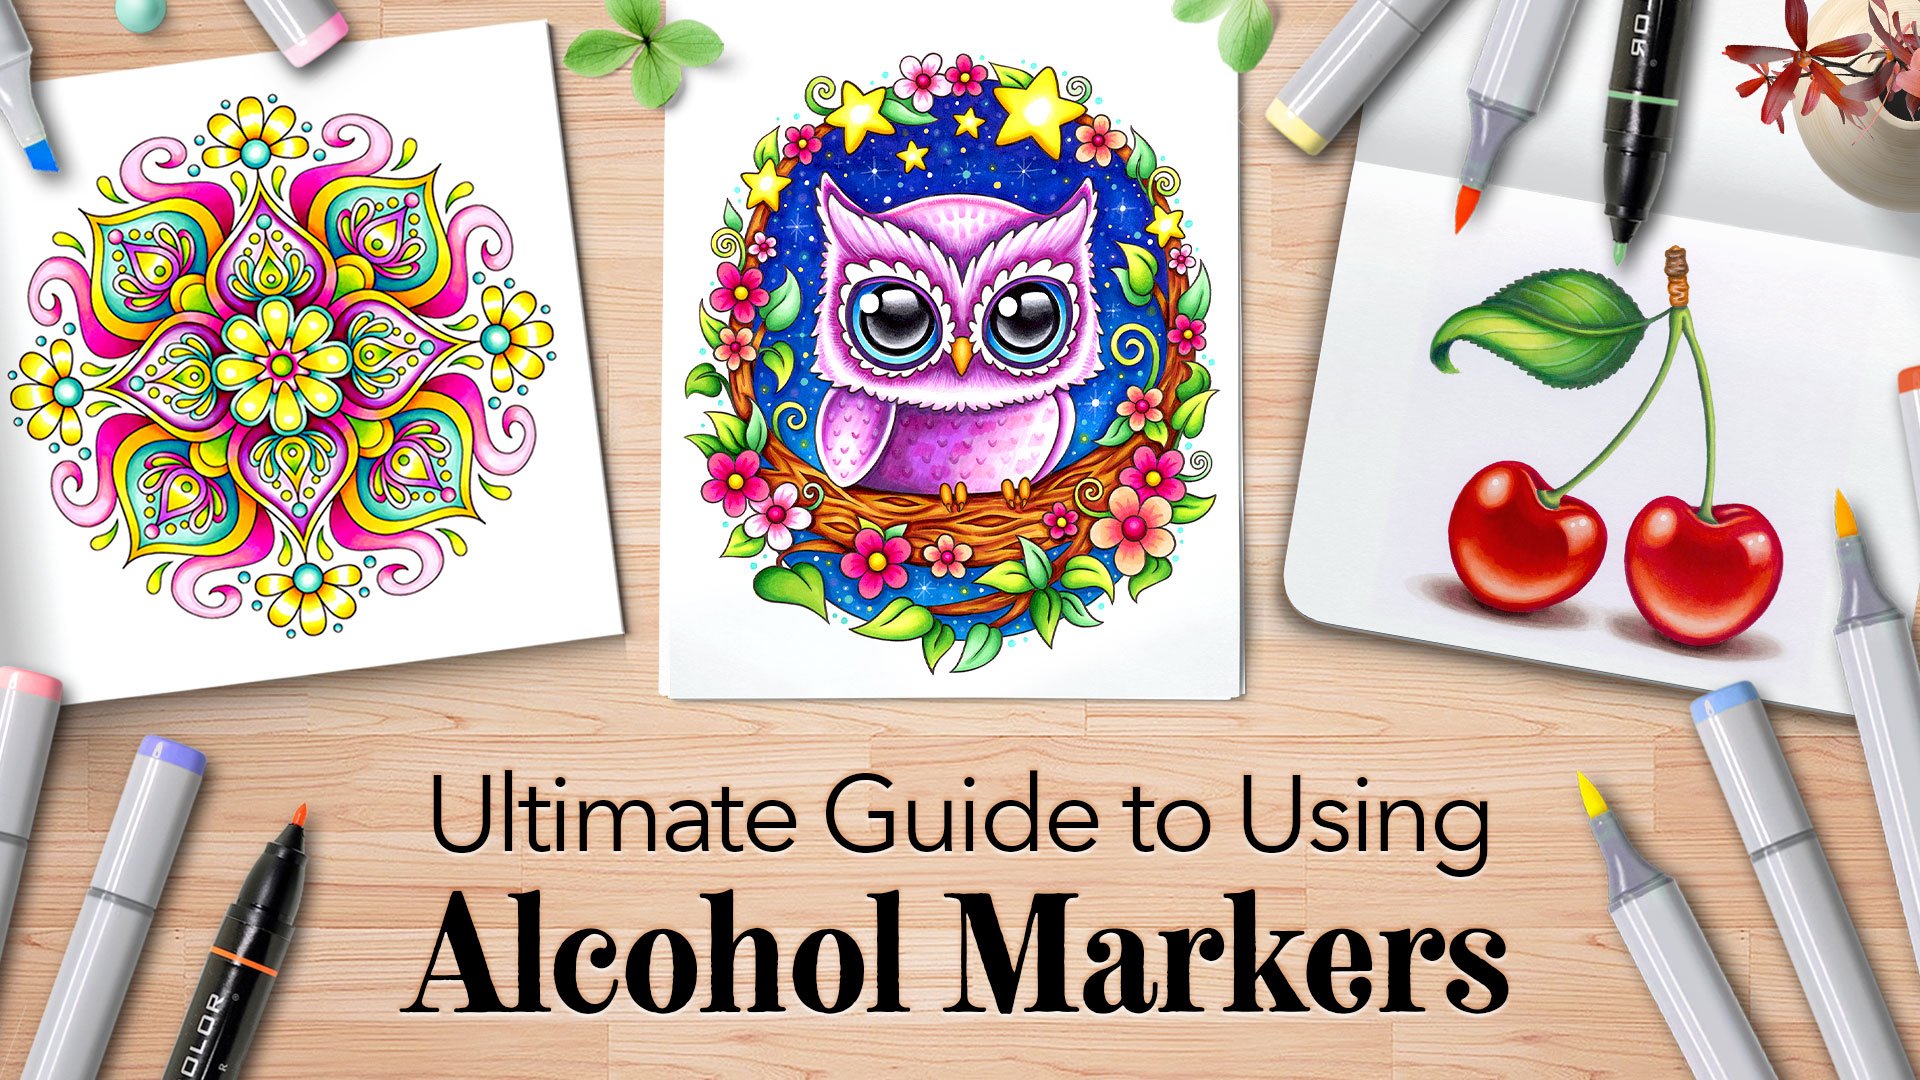 https://images.squarespace-cdn.com/content/v1/5511fc7ce4b0a3782aa9418b/1673126309878-KKOI499KC2SIYKWVAWN5/Ultimate-Guide-to-Using-Alcohol-Markers-by-Thaneeya-McArdle.jpg